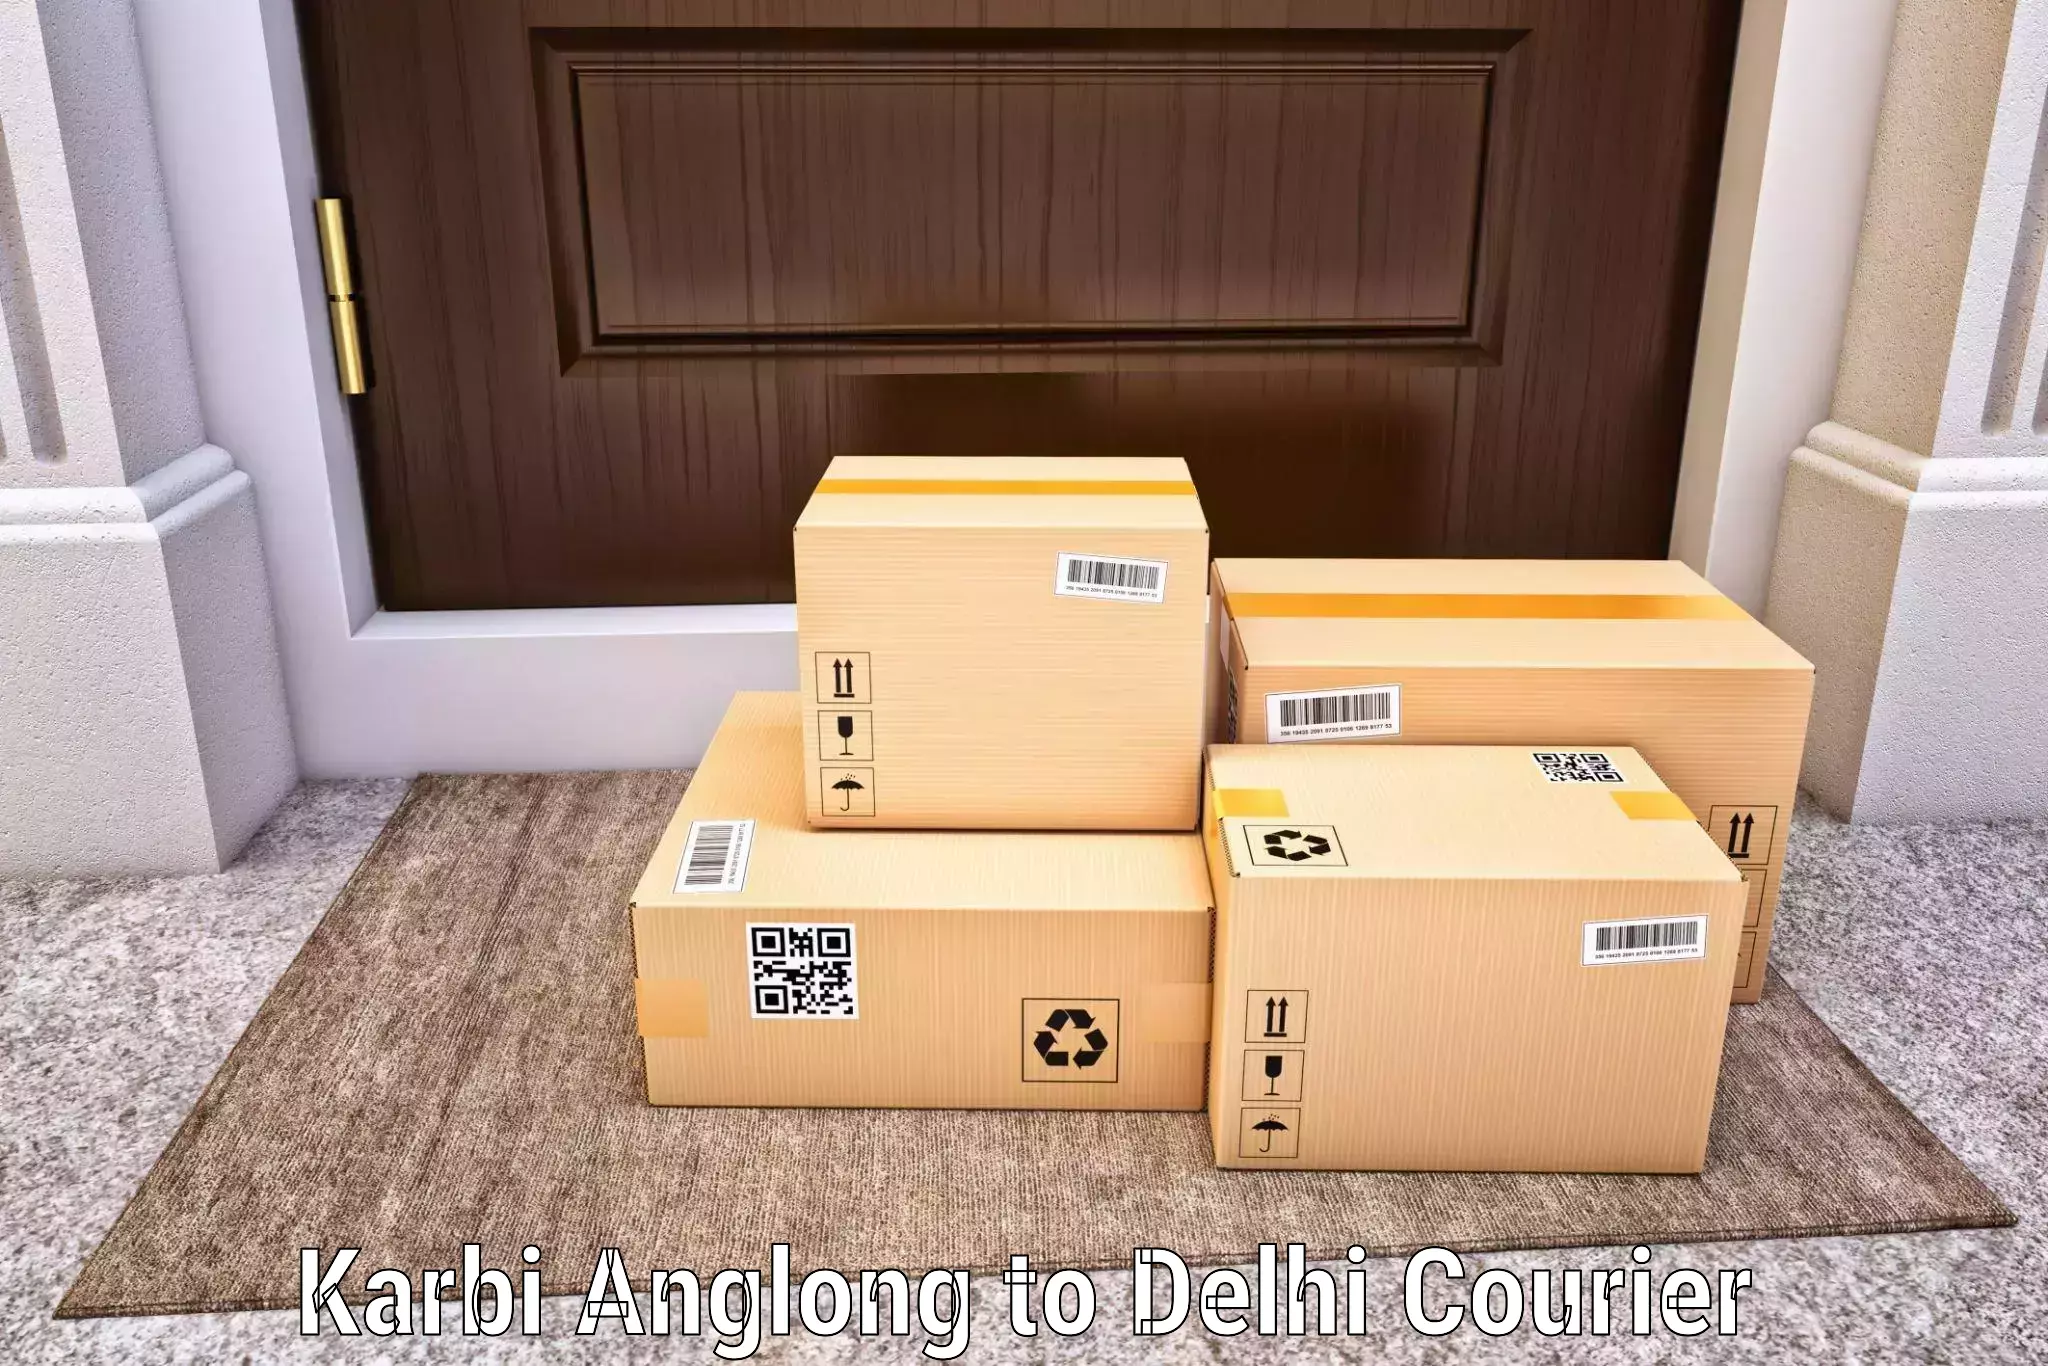 Courier rate comparison Karbi Anglong to University of Delhi